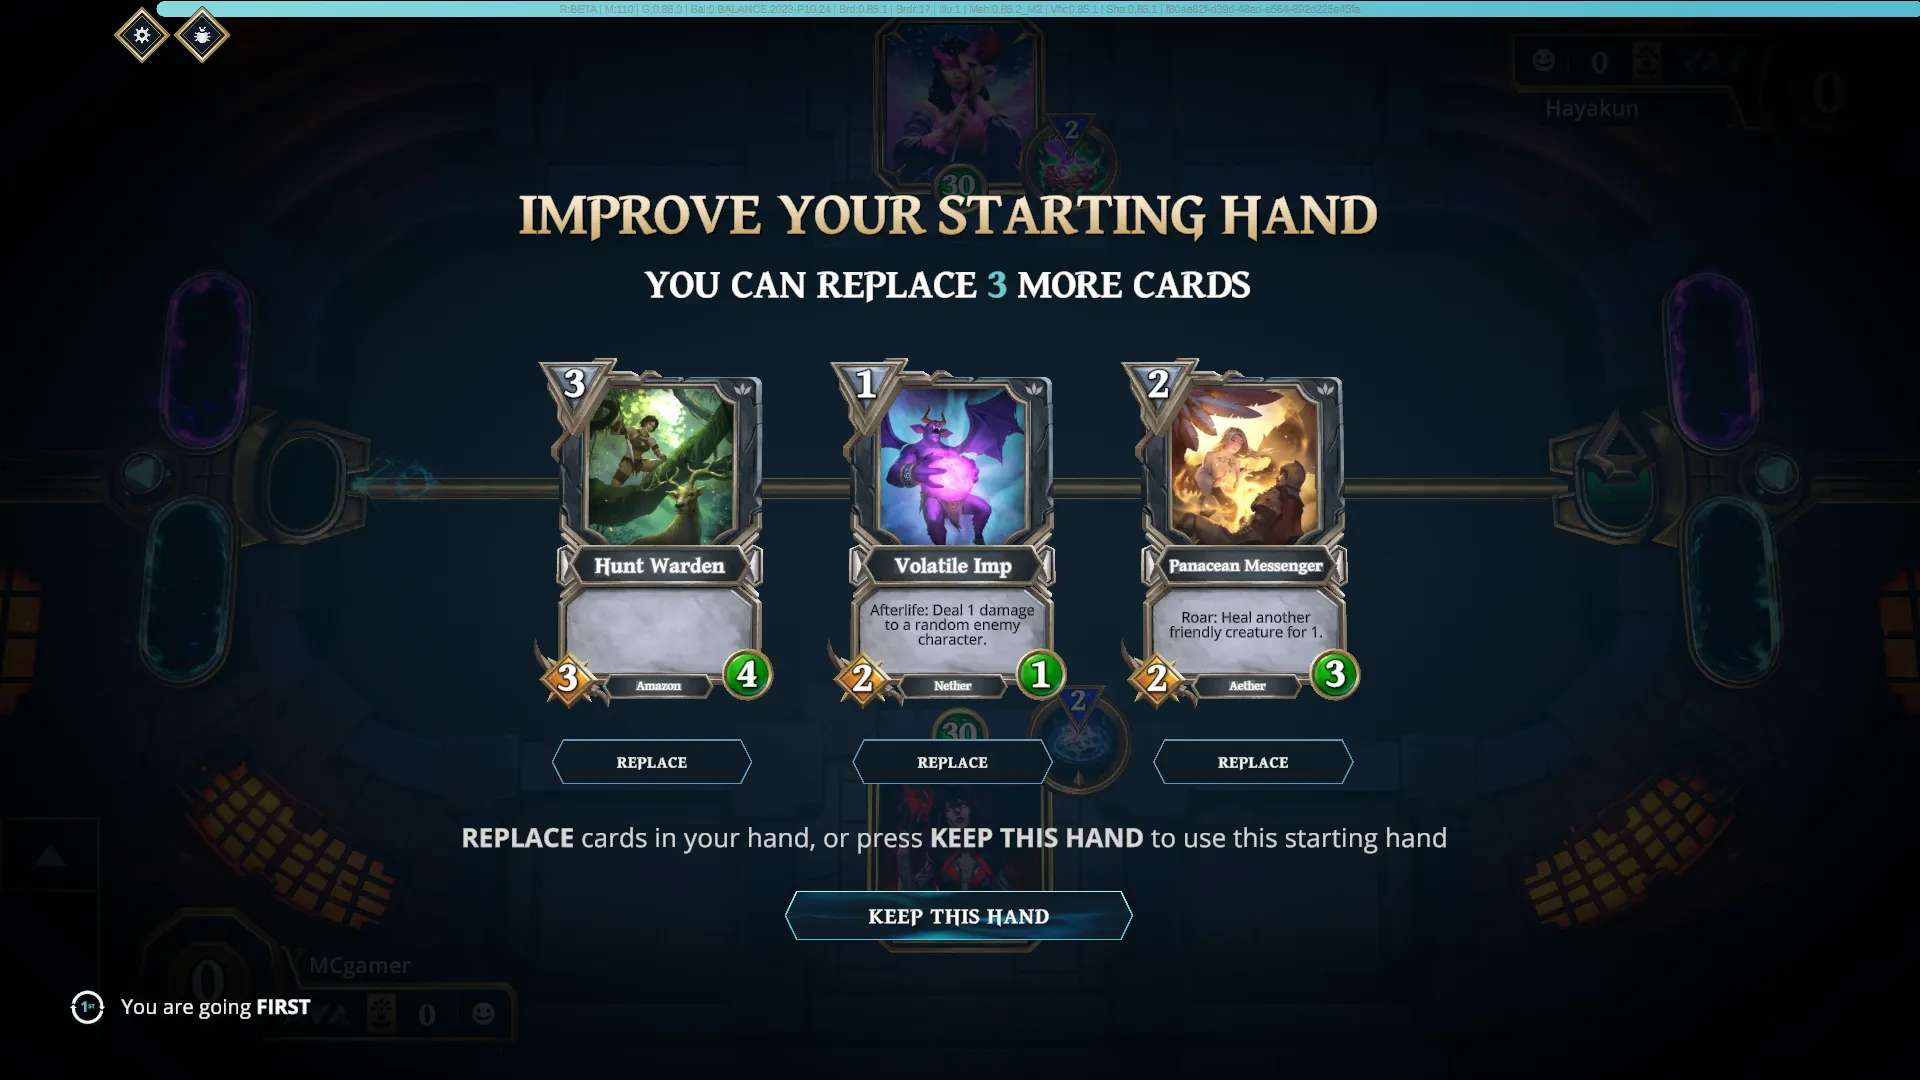 After each player chose their God Power, they can now work on improving their starting hand. They have three chances to replace it, and they can also keep their hand if they want